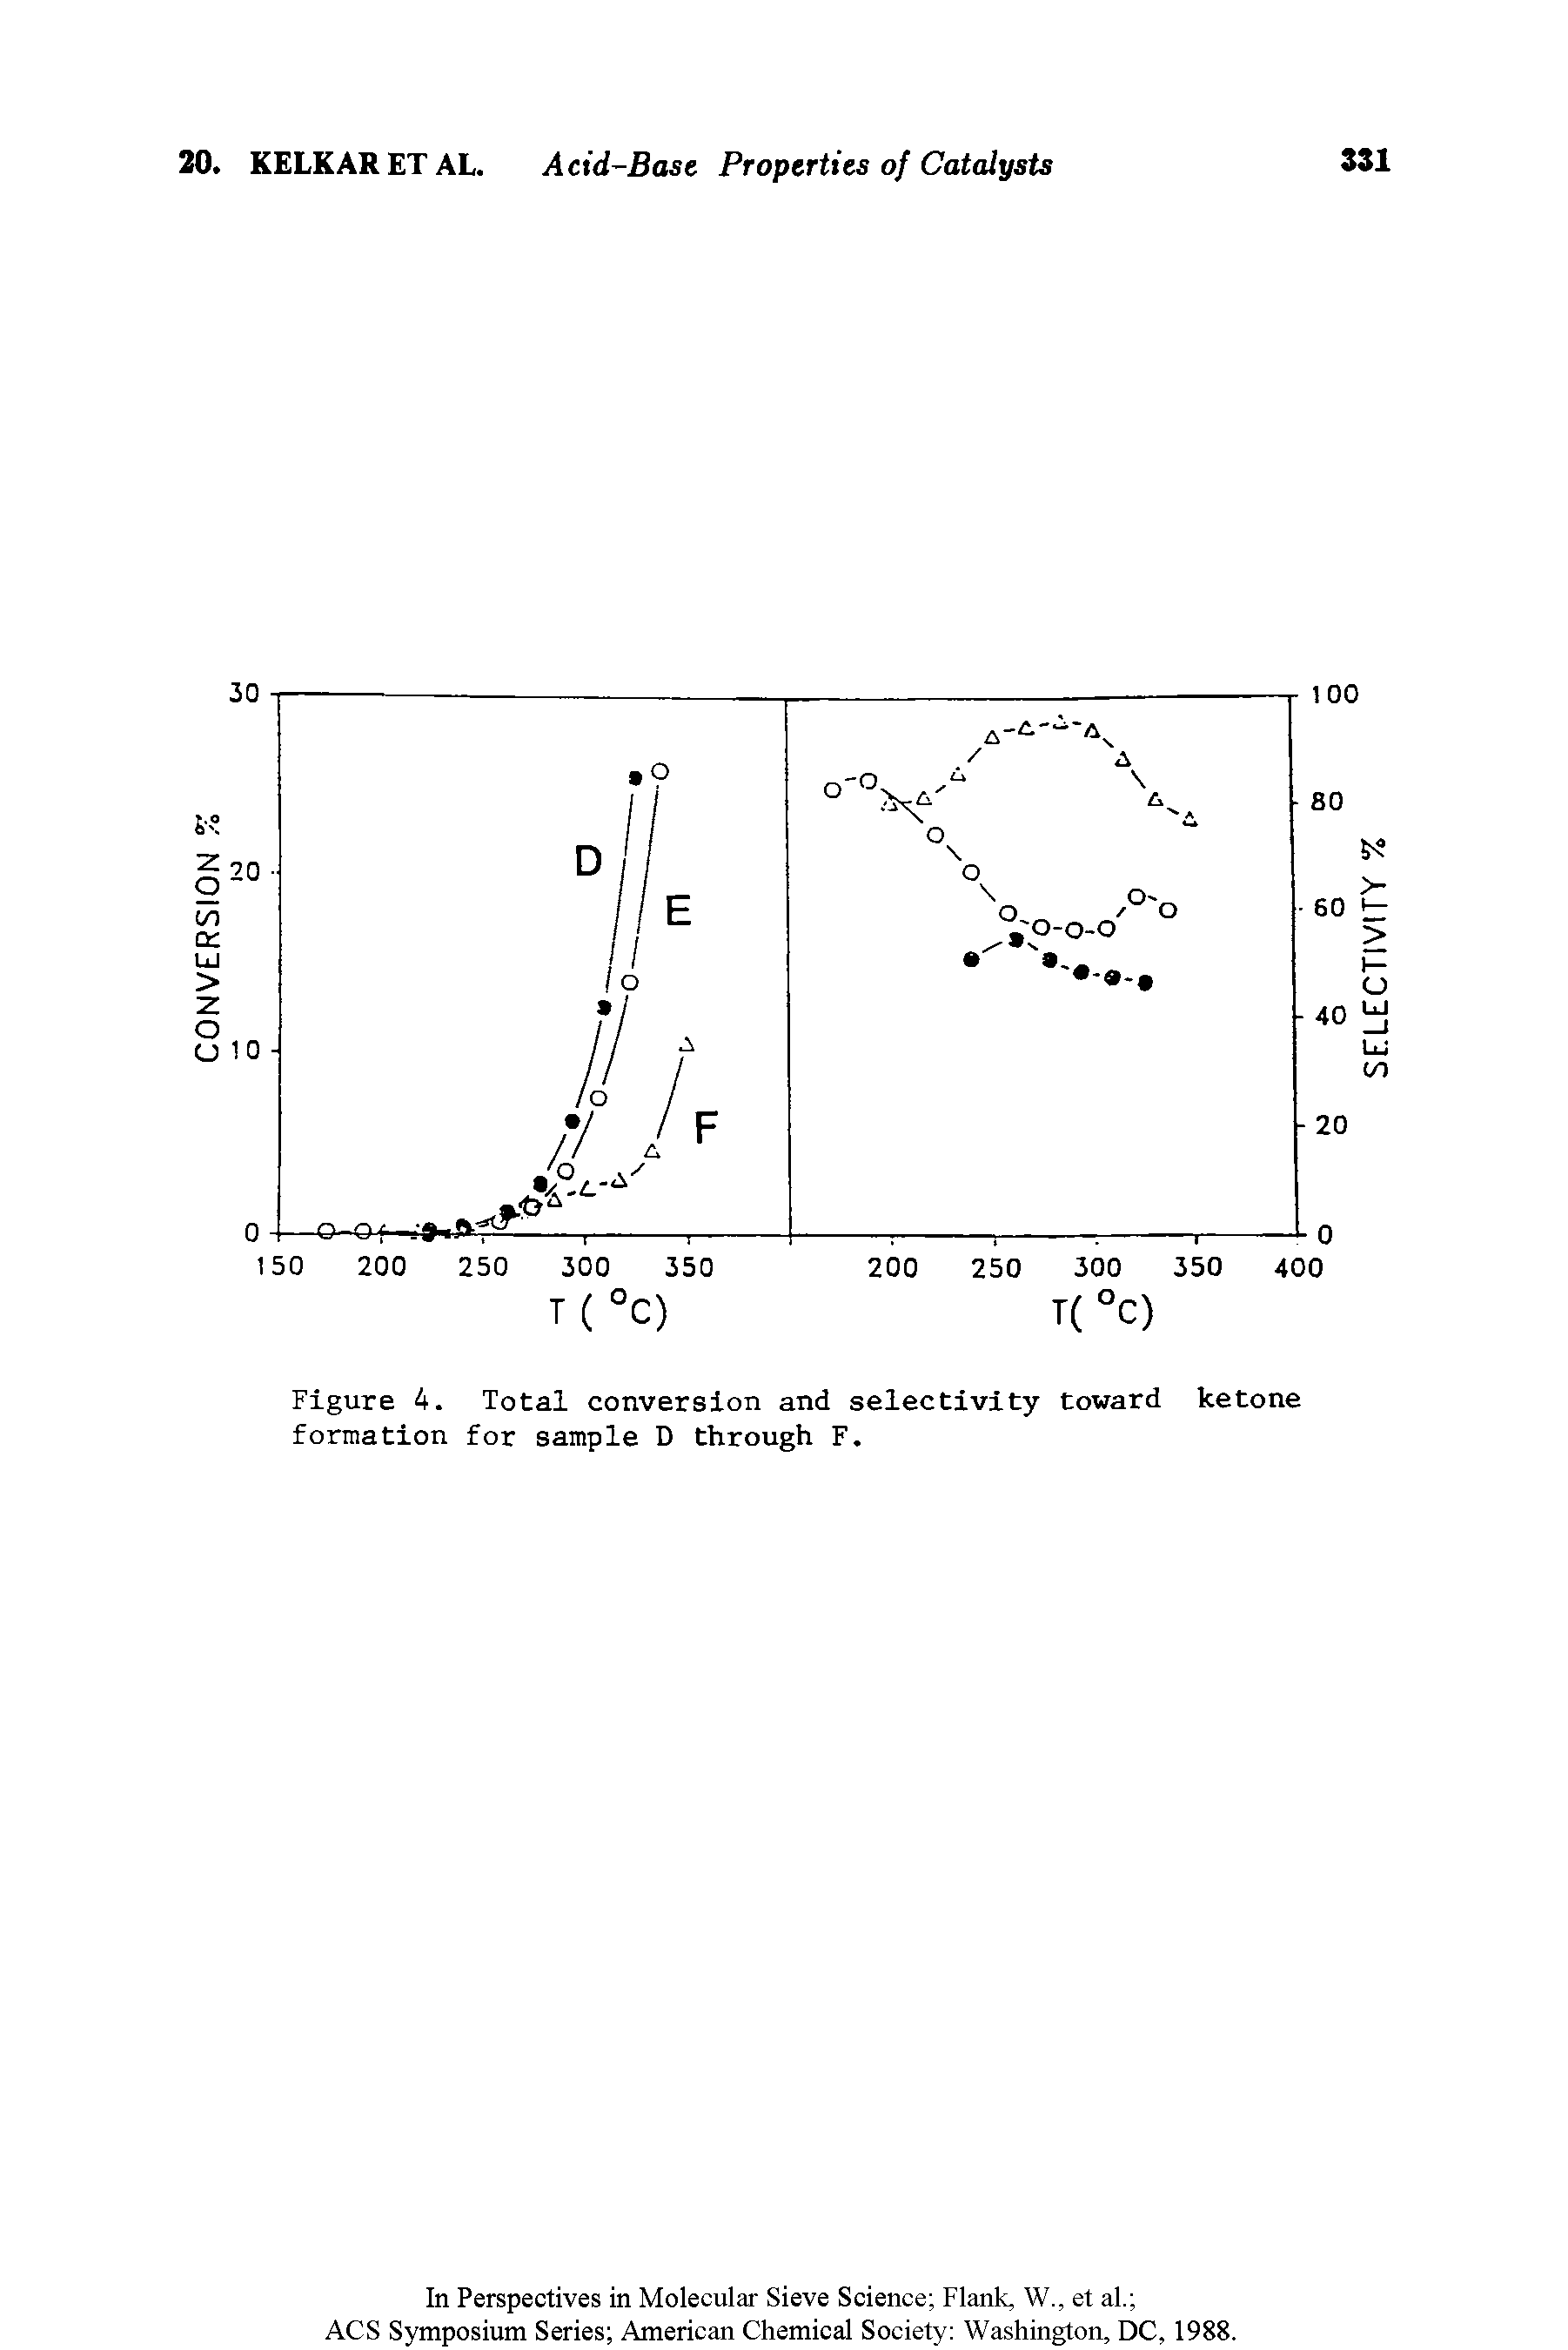 Figure 4. Total conversion and selectivity toward ketone formation for sample D through F.